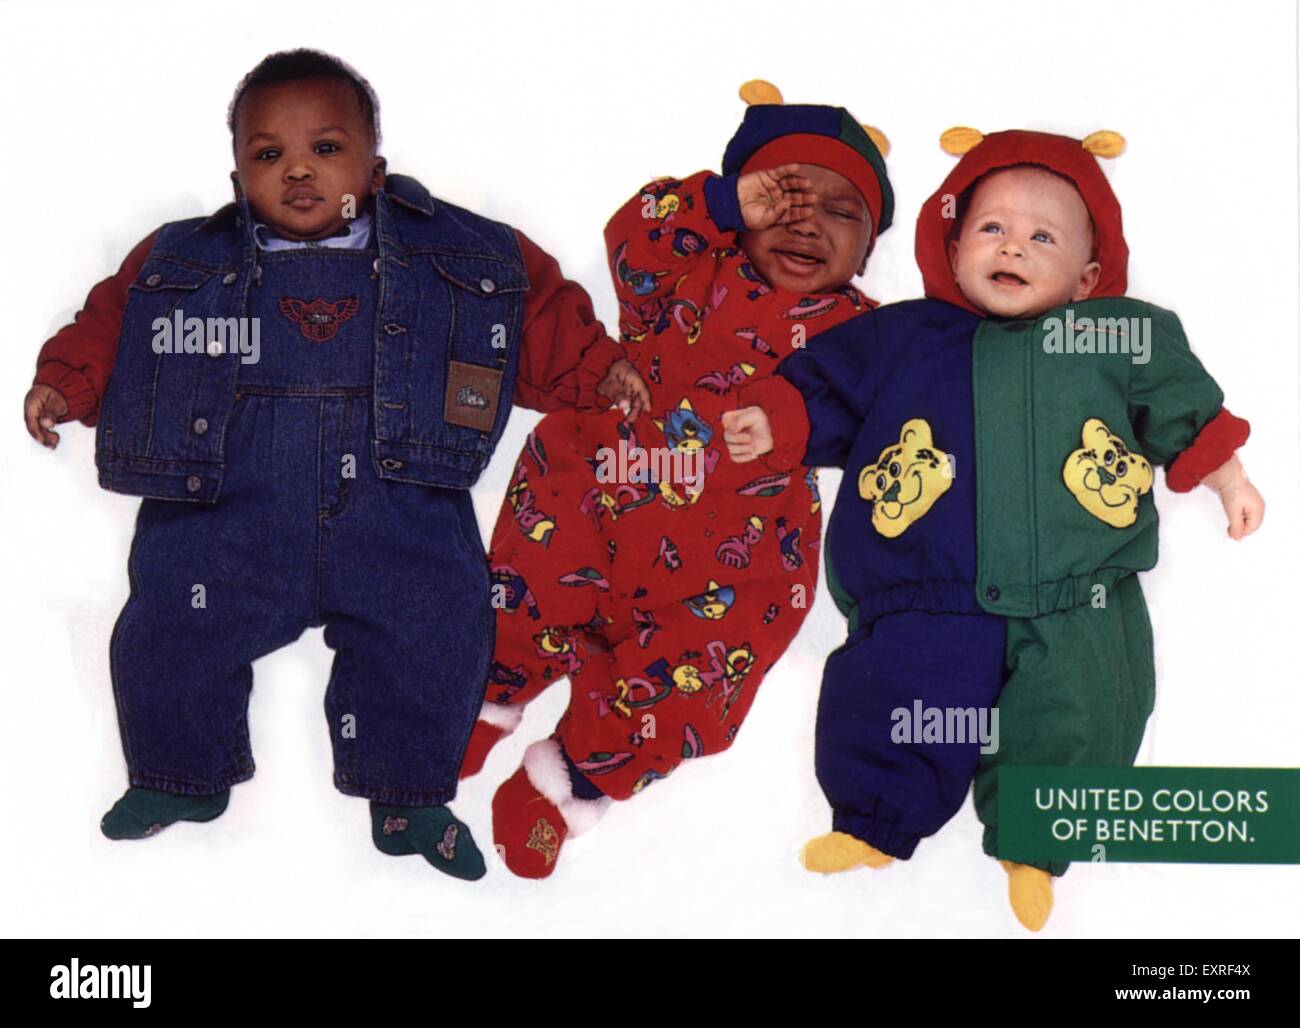 1990s Uk United Colors Benetton High Resolution Stock Photography and  Images - Alamy